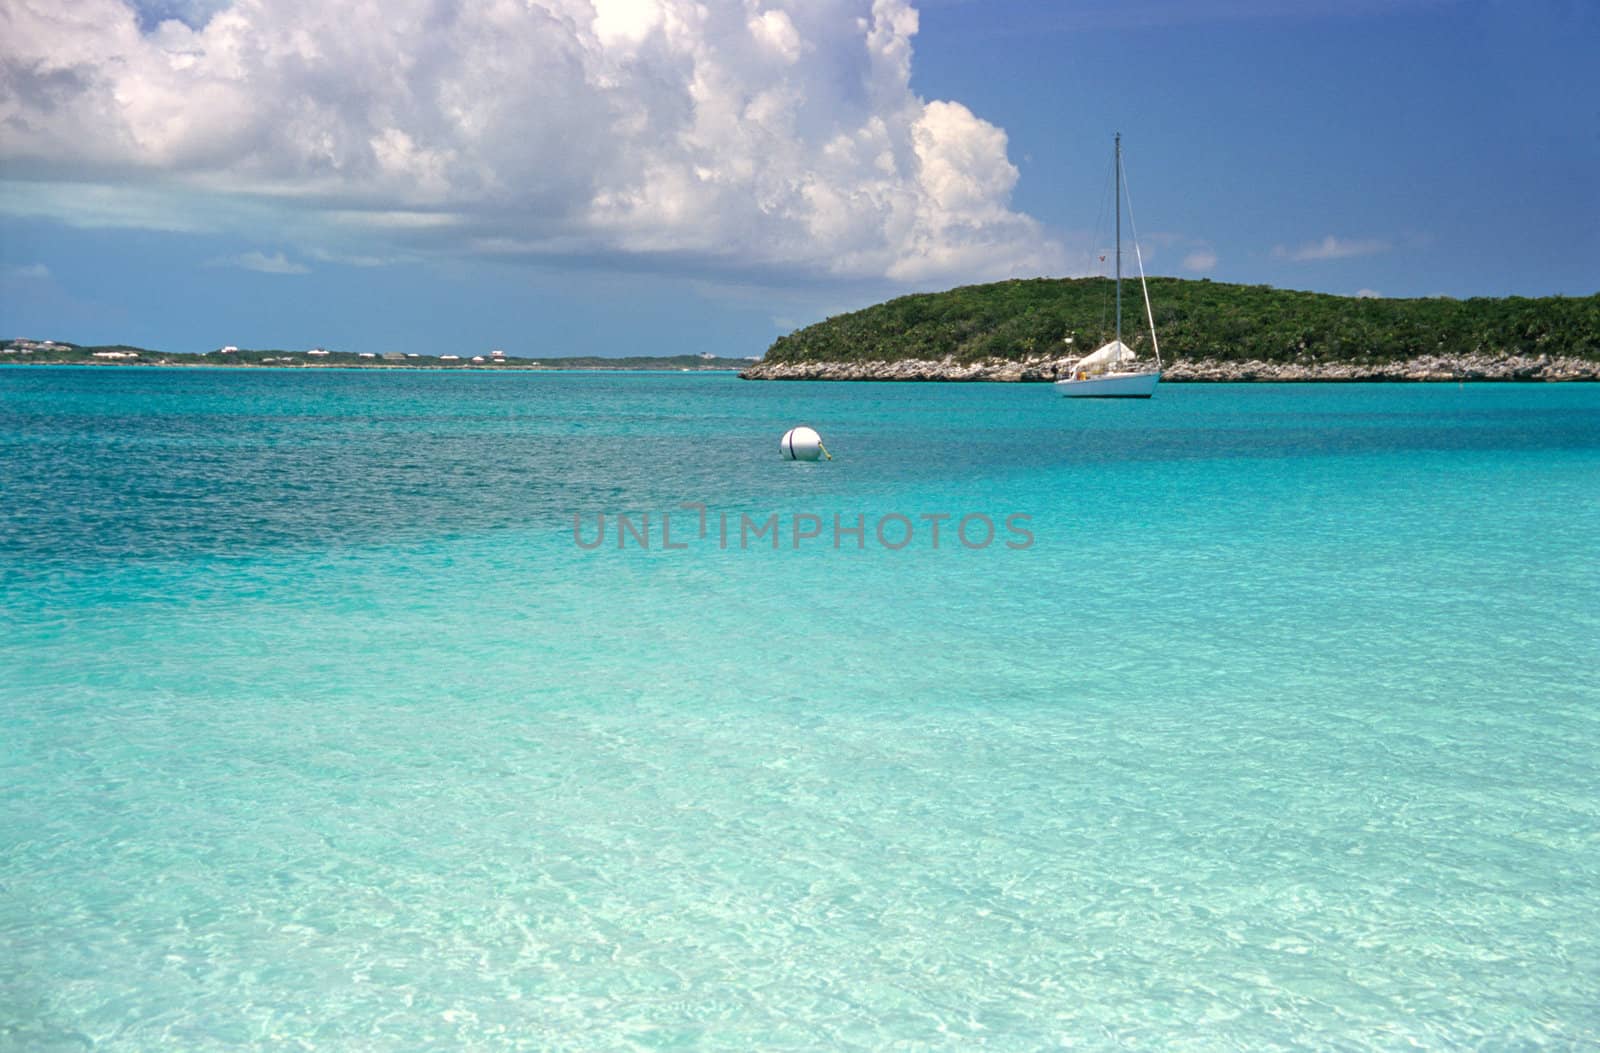 Sailboat on the turquoise caribbean sea by ACMPhoto